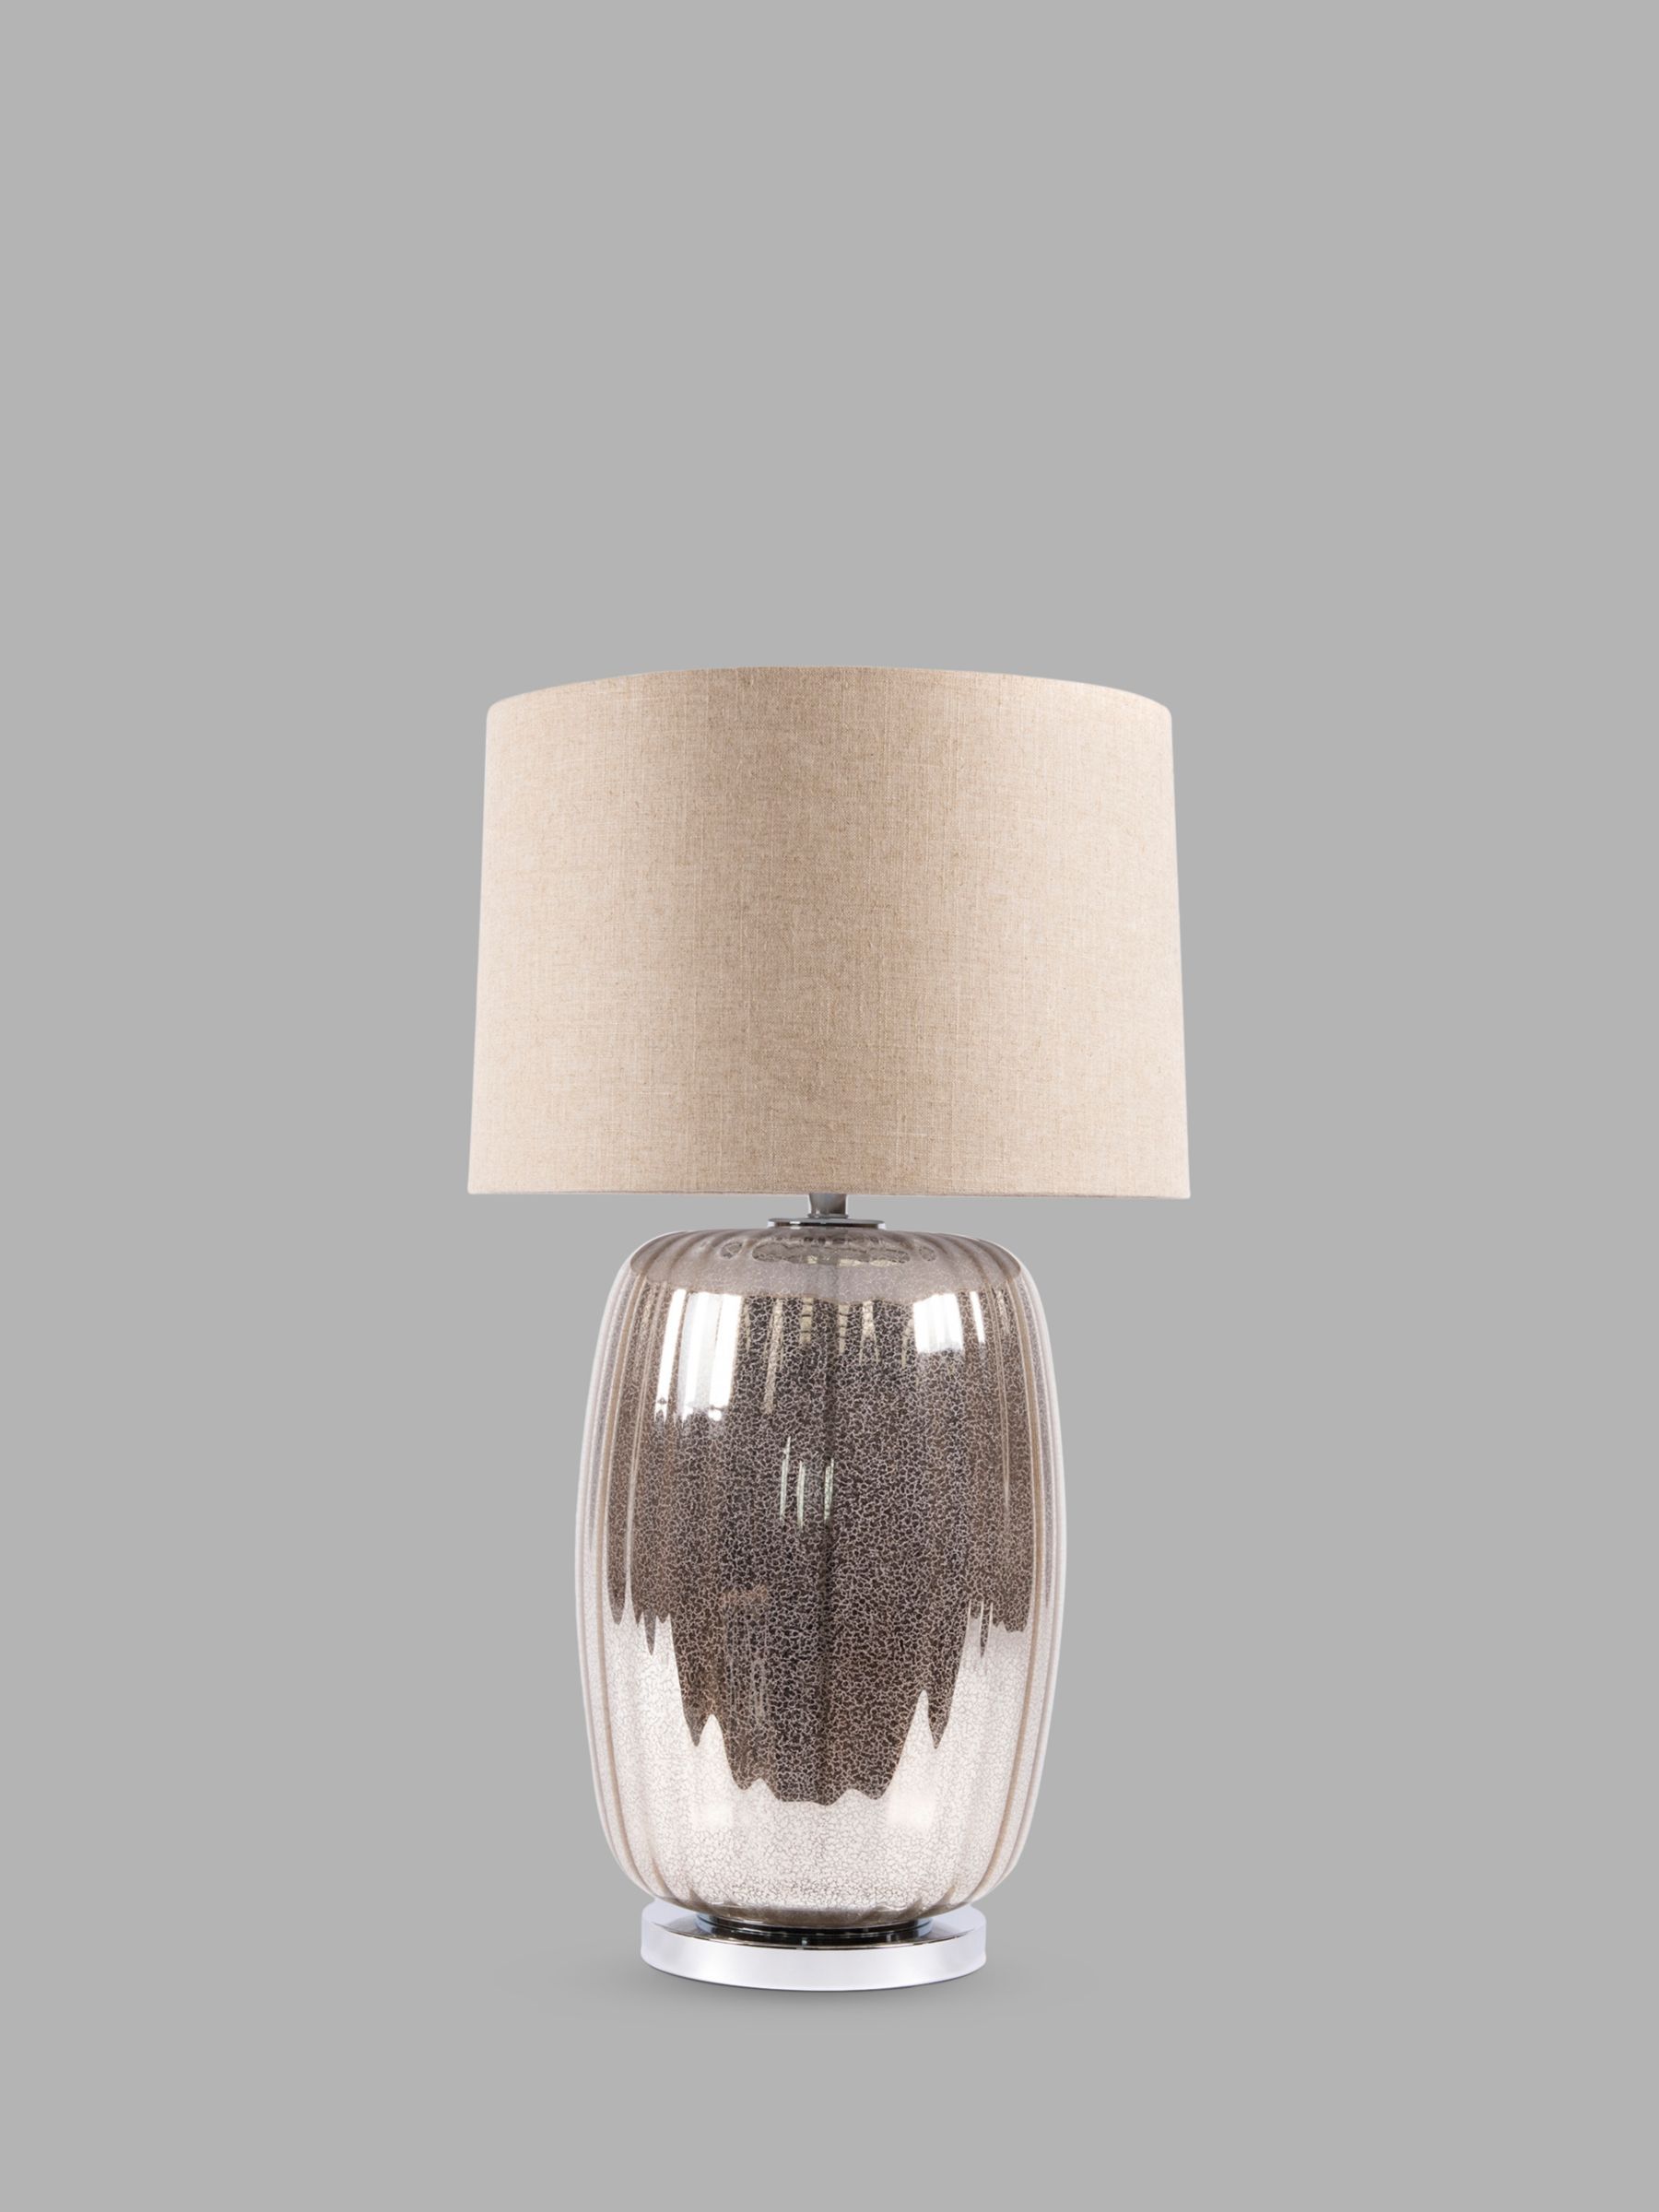 Photo of One.world clifton crackle base linen shared table lamp mercury